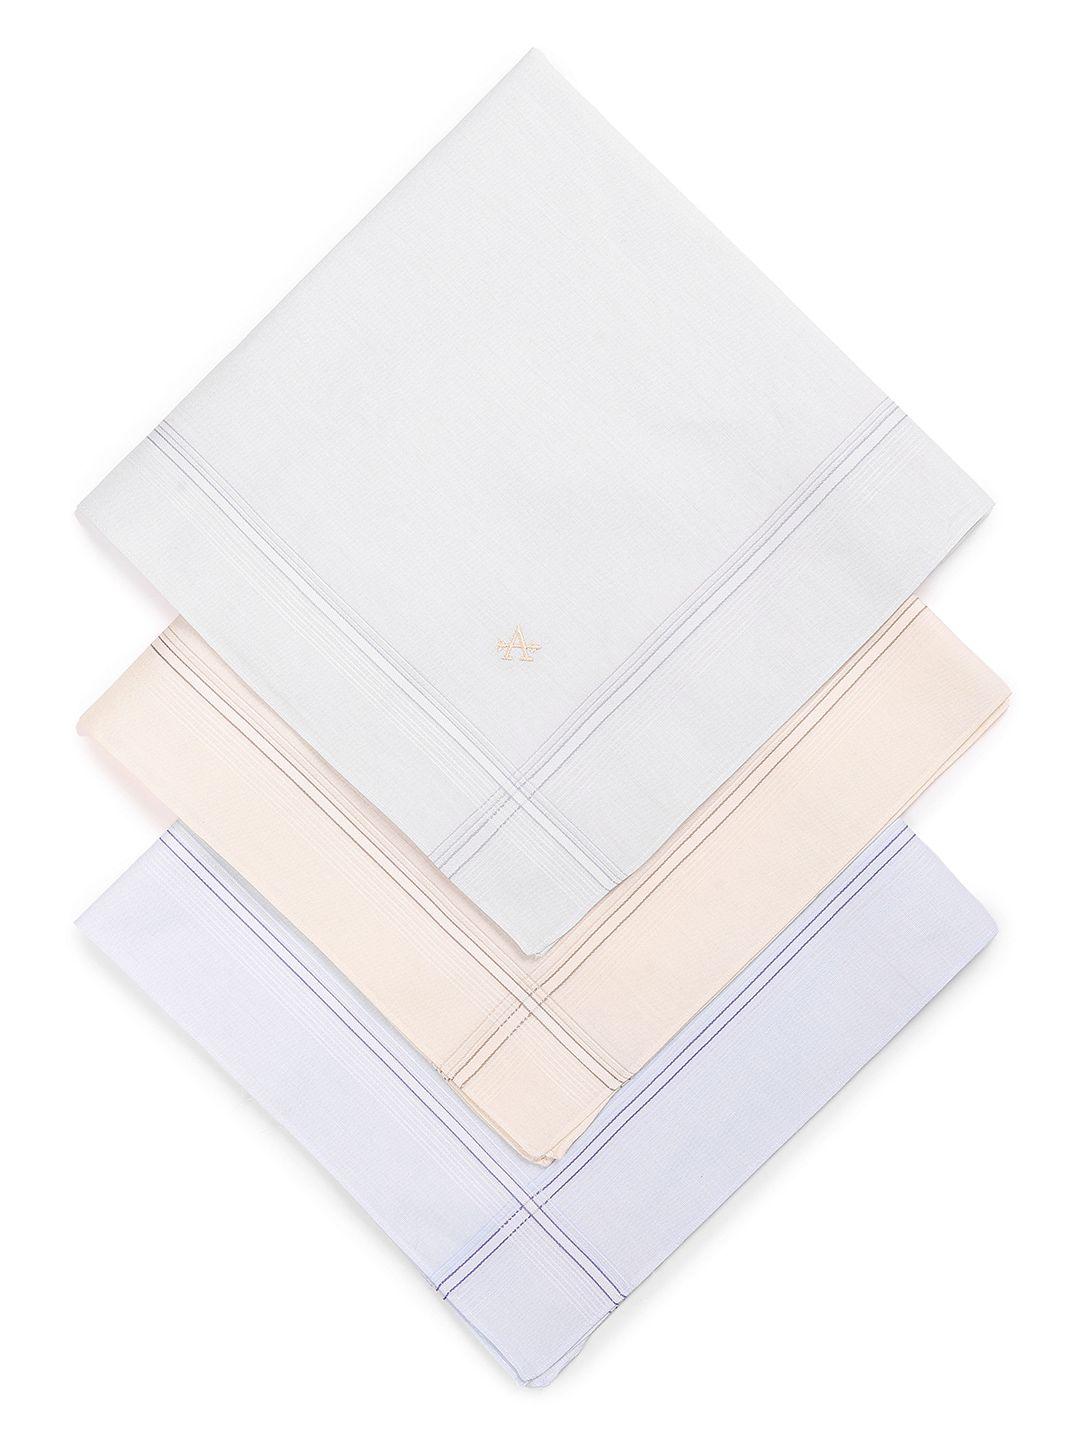 arrow men pack of 3 logo embroidered striped pure cotton handkerchiefs